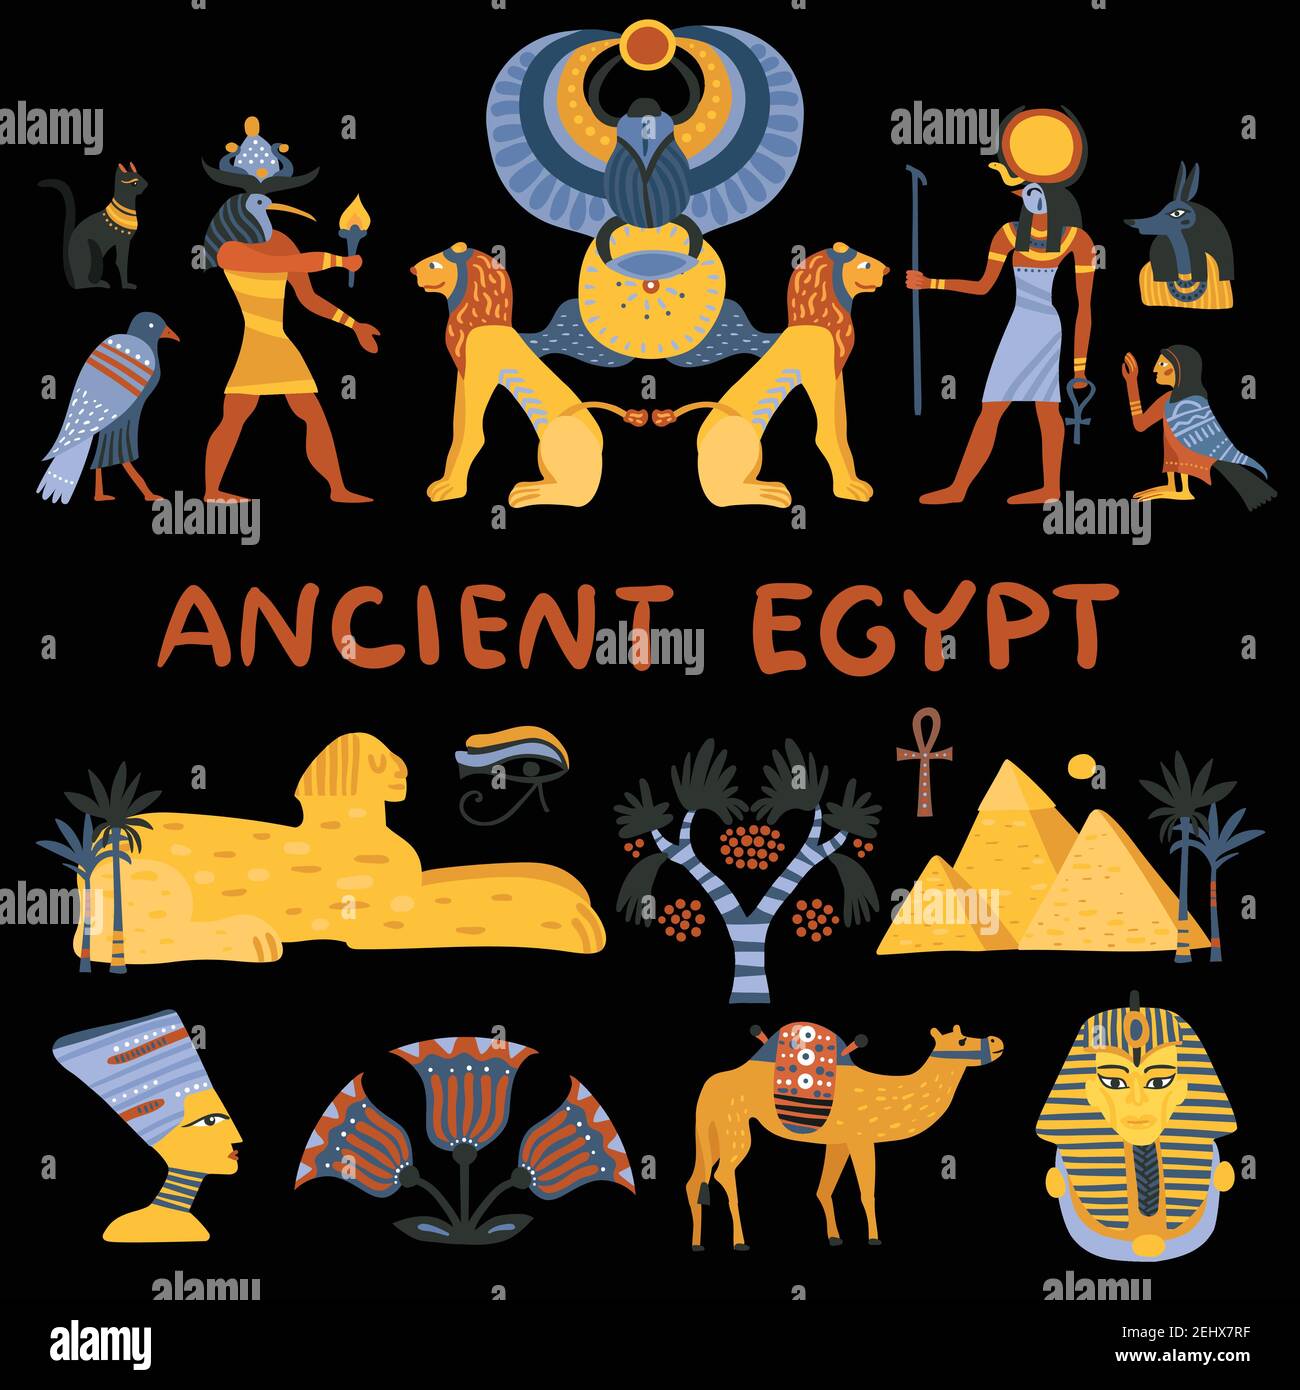 Ancient egypt set of decorative icons isolated on black background with religious and tourist symbols vector illustration Stock Vector